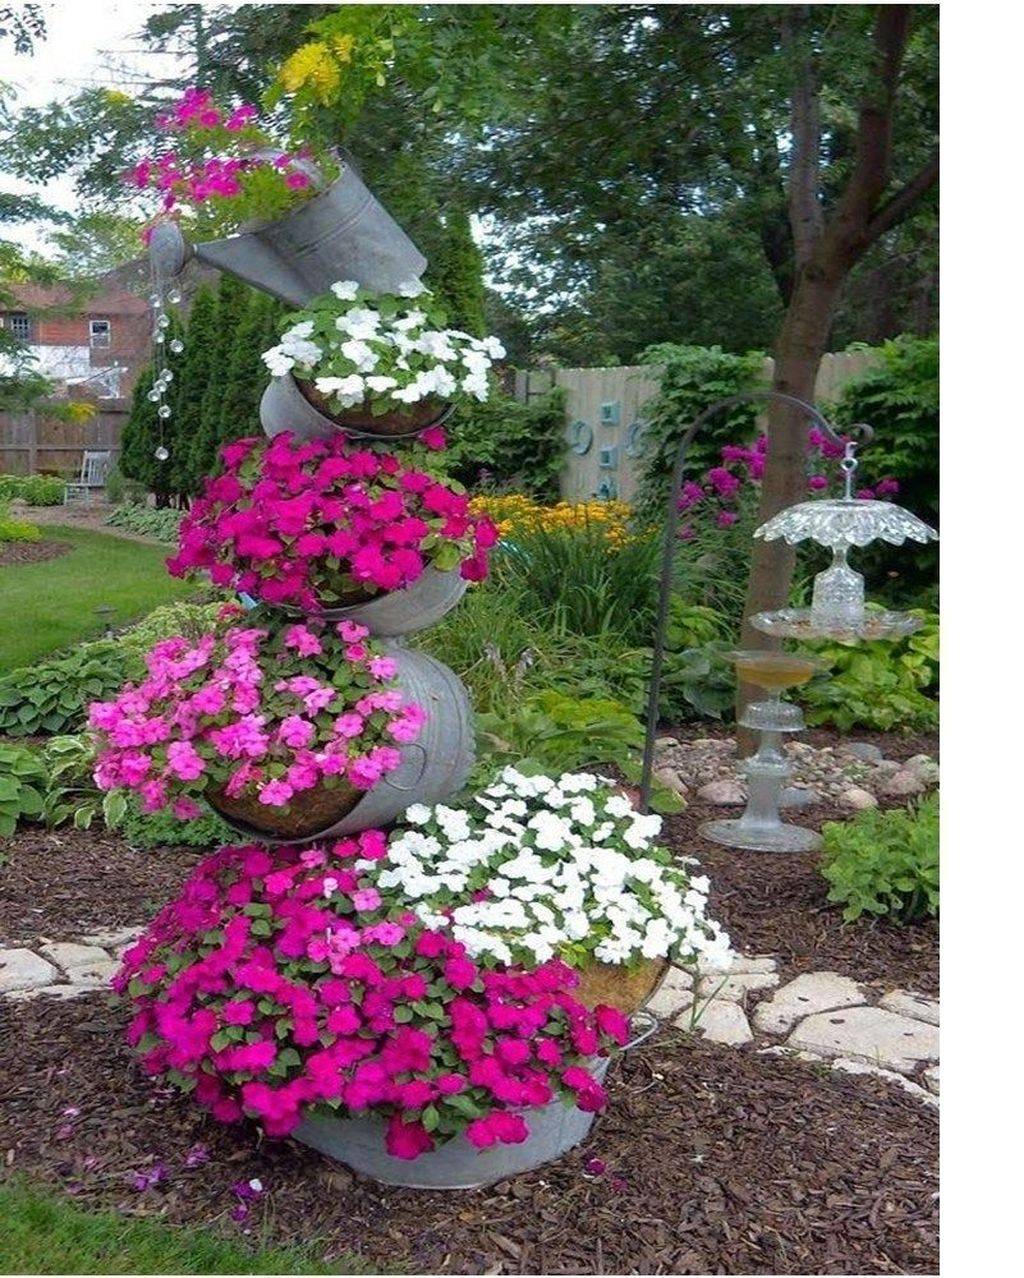 Awesome Landscaping Front Yard Ideas Popy Home Beautiful Gardens